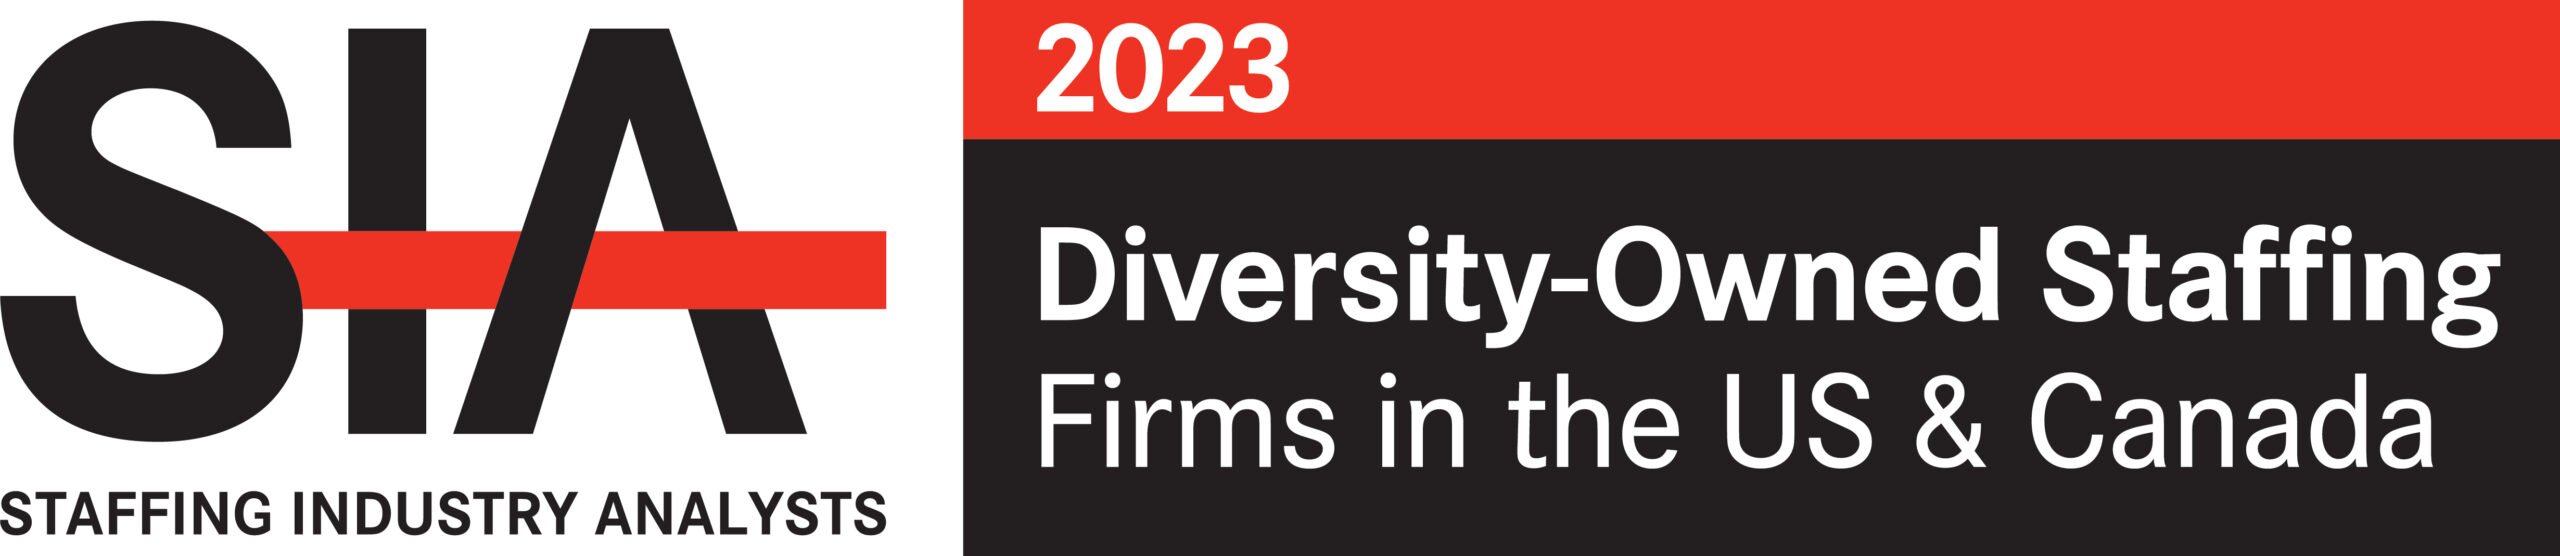 SIA: 2023 Diversity-Owned Staffing Firms